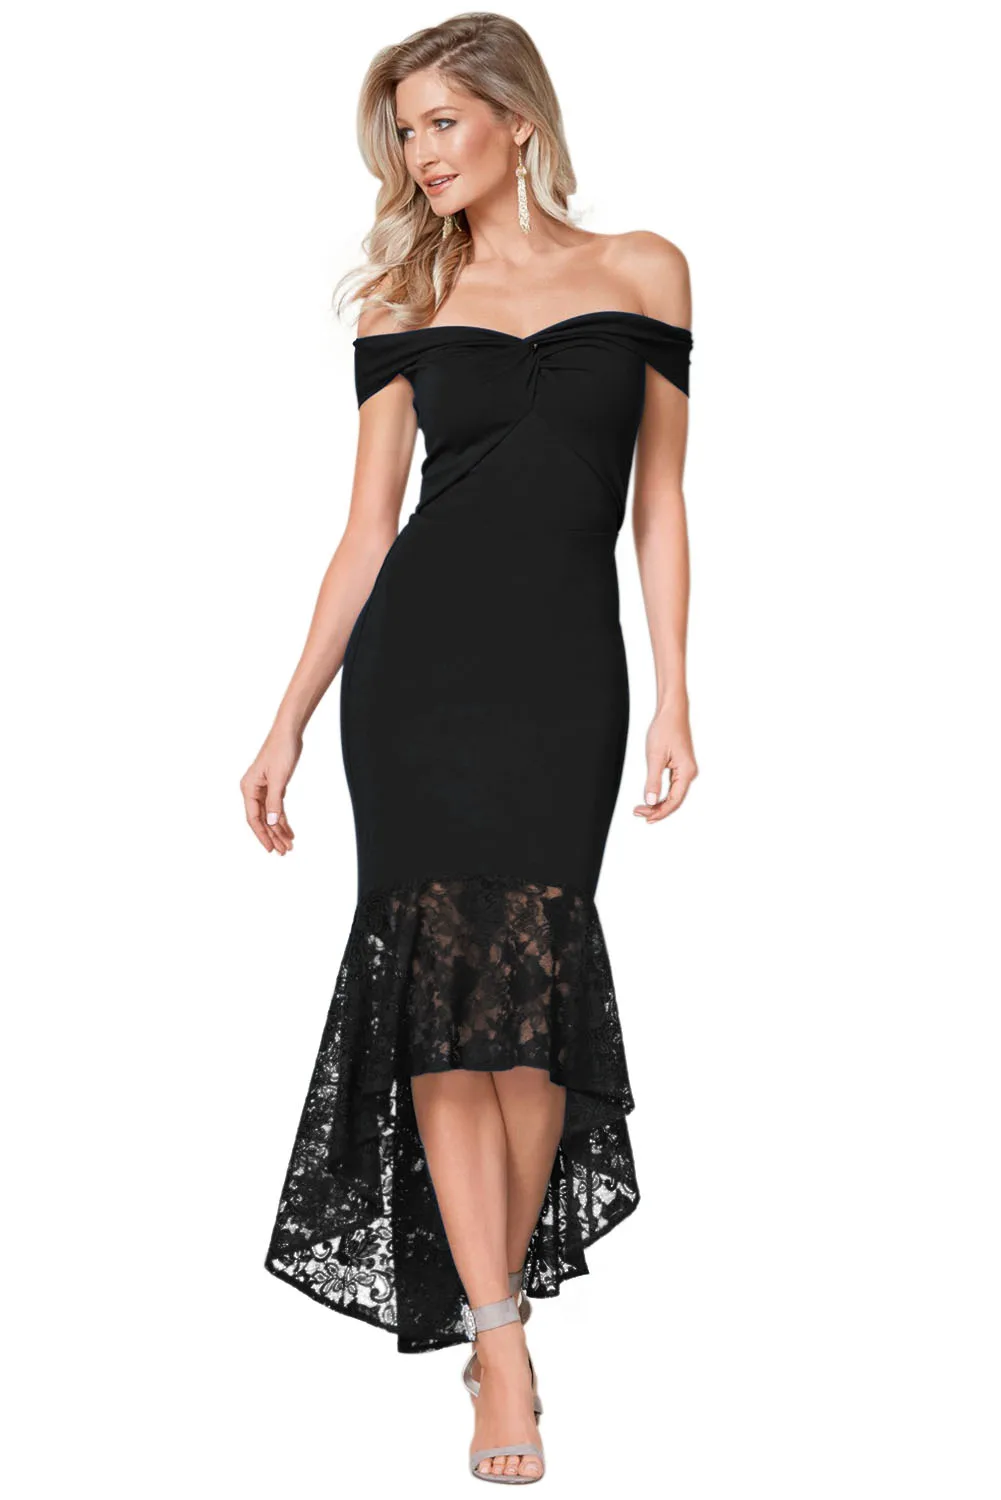 Low Back See-through Sexy Lace Evening Dress Of Patterns - Buy Evening ...